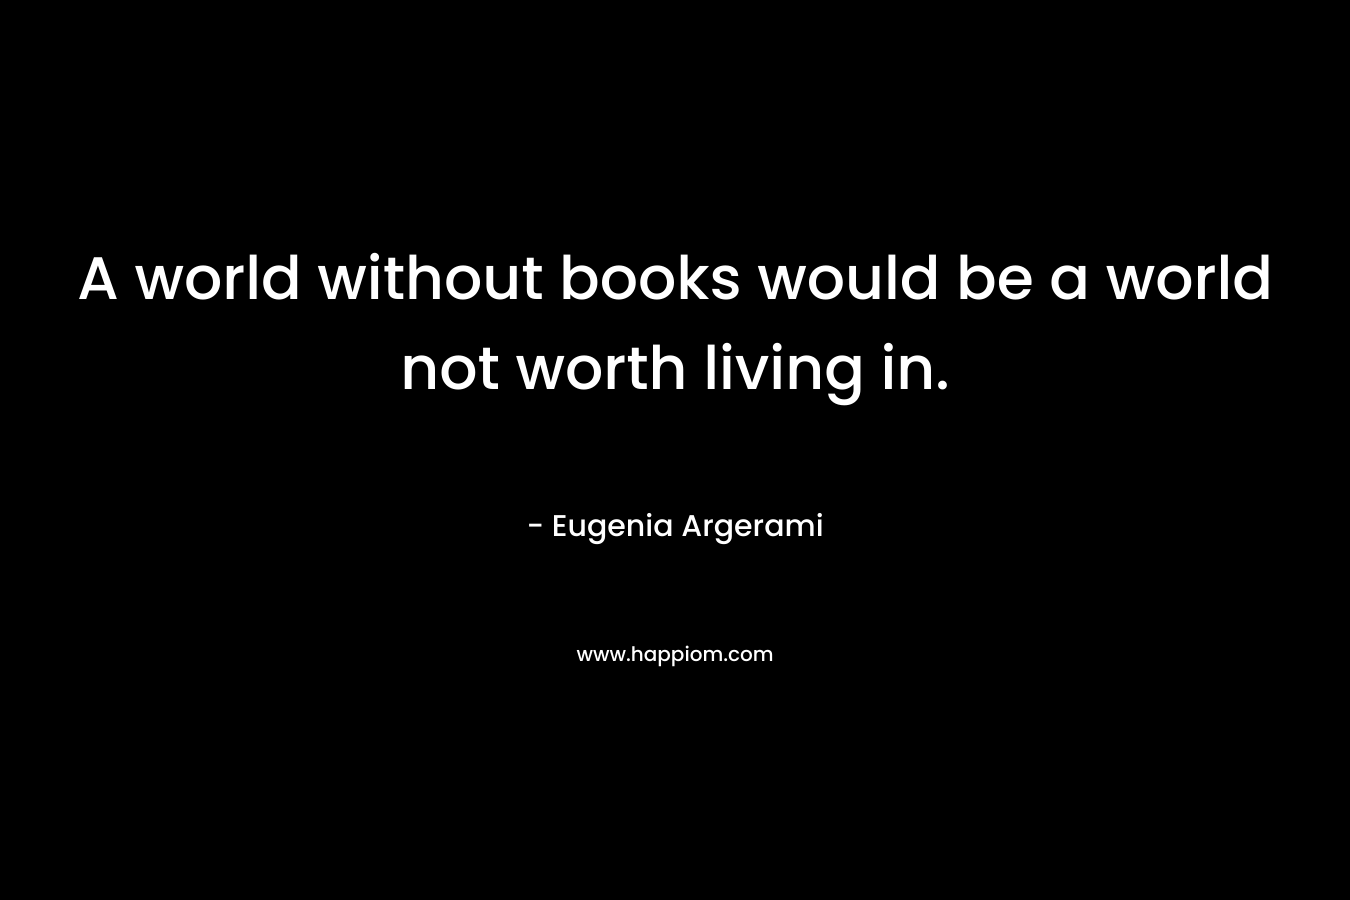 A world without books would be a world not worth living in.